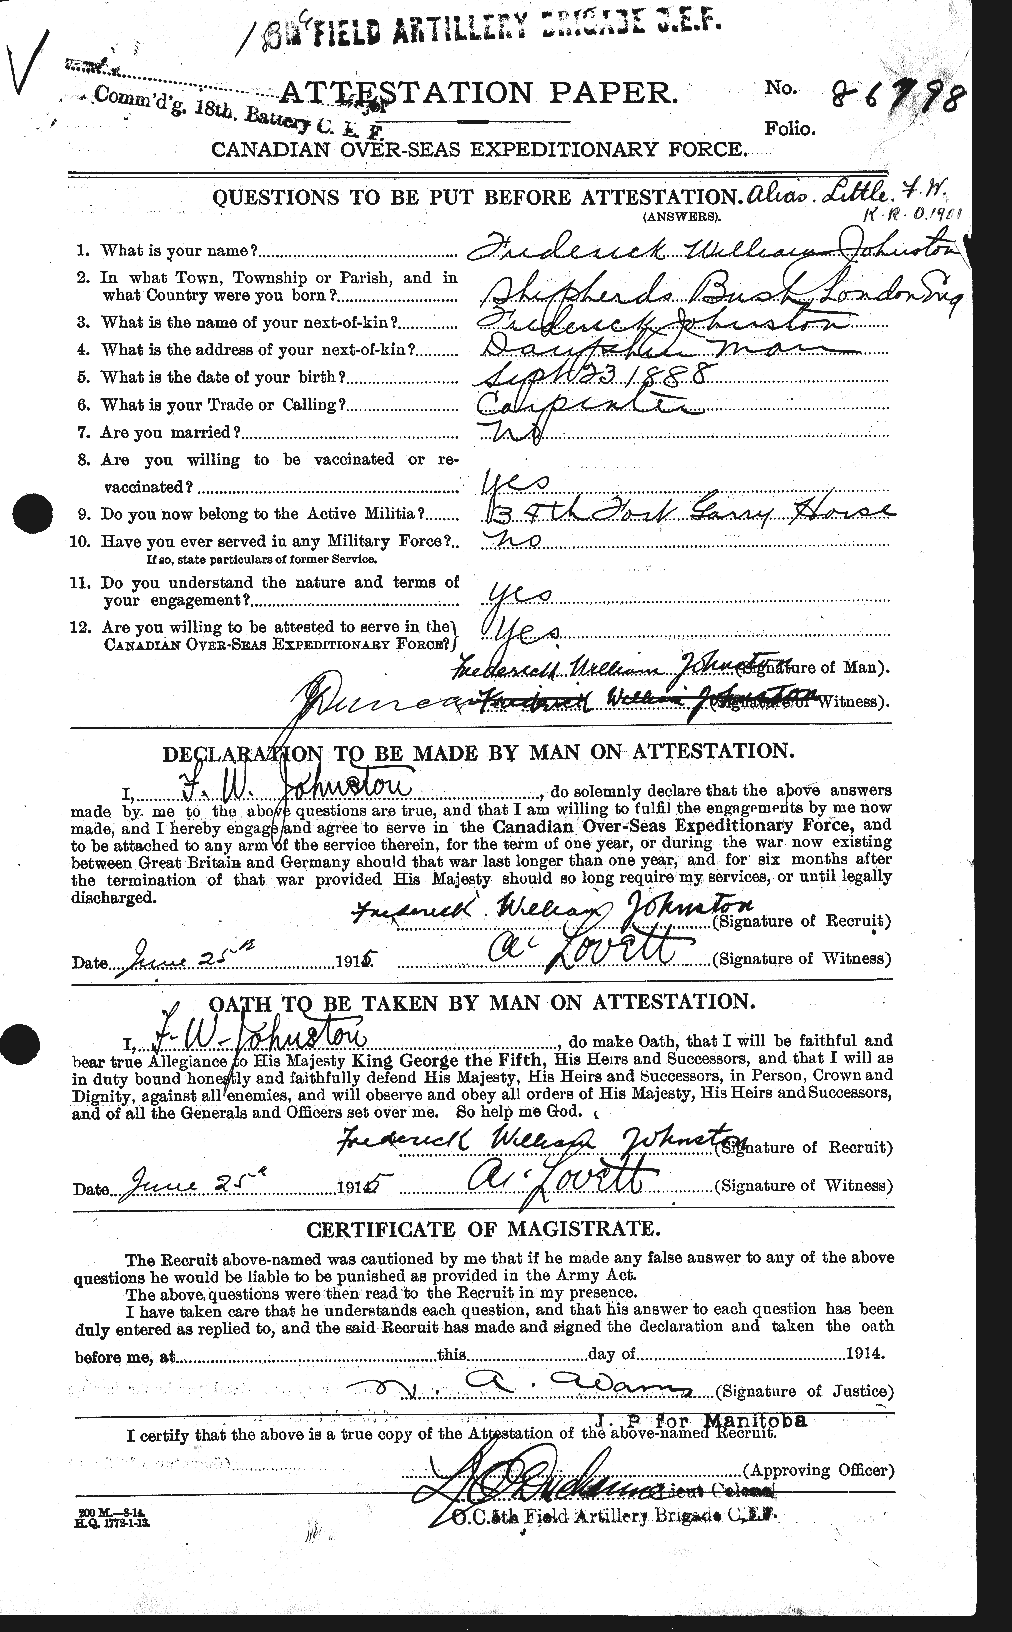 Personnel Records of the First World War - CEF 467273a